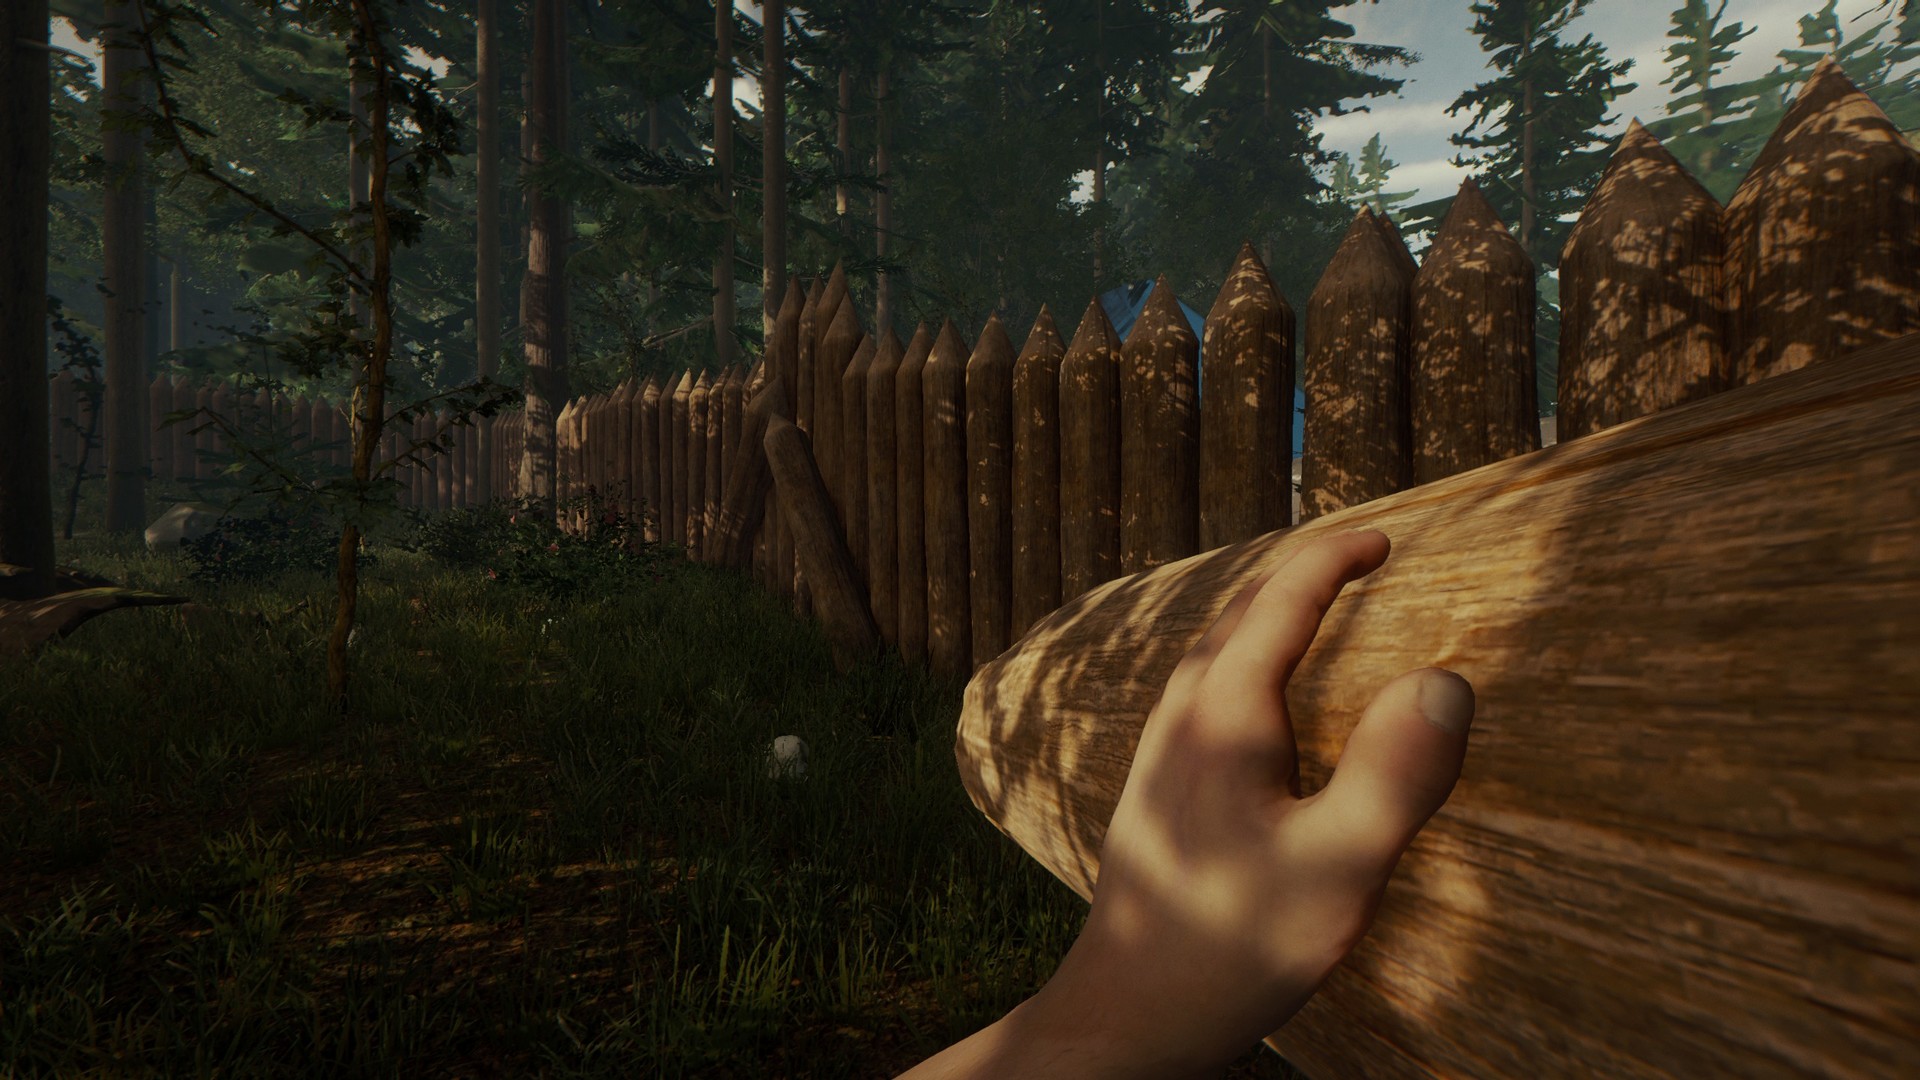 Indie Survival Horror The Forest Launches Out of Early Access; Free VR  Version Coming on May 22nd